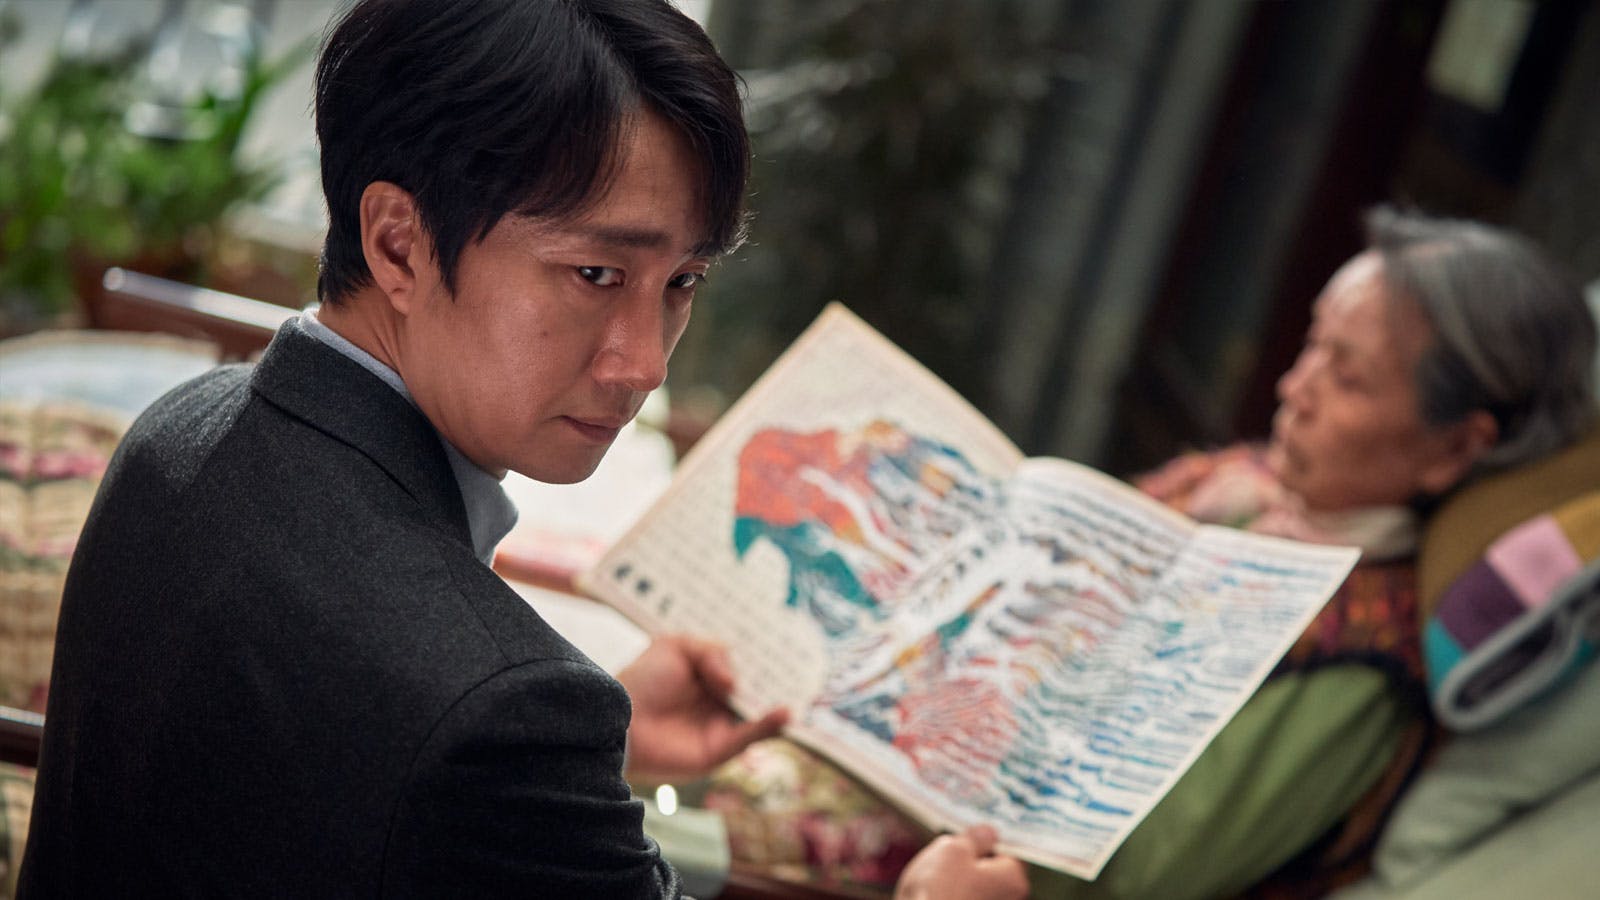 Park Chan-wook on His “Obsessive” New Noir, Decision to Leave